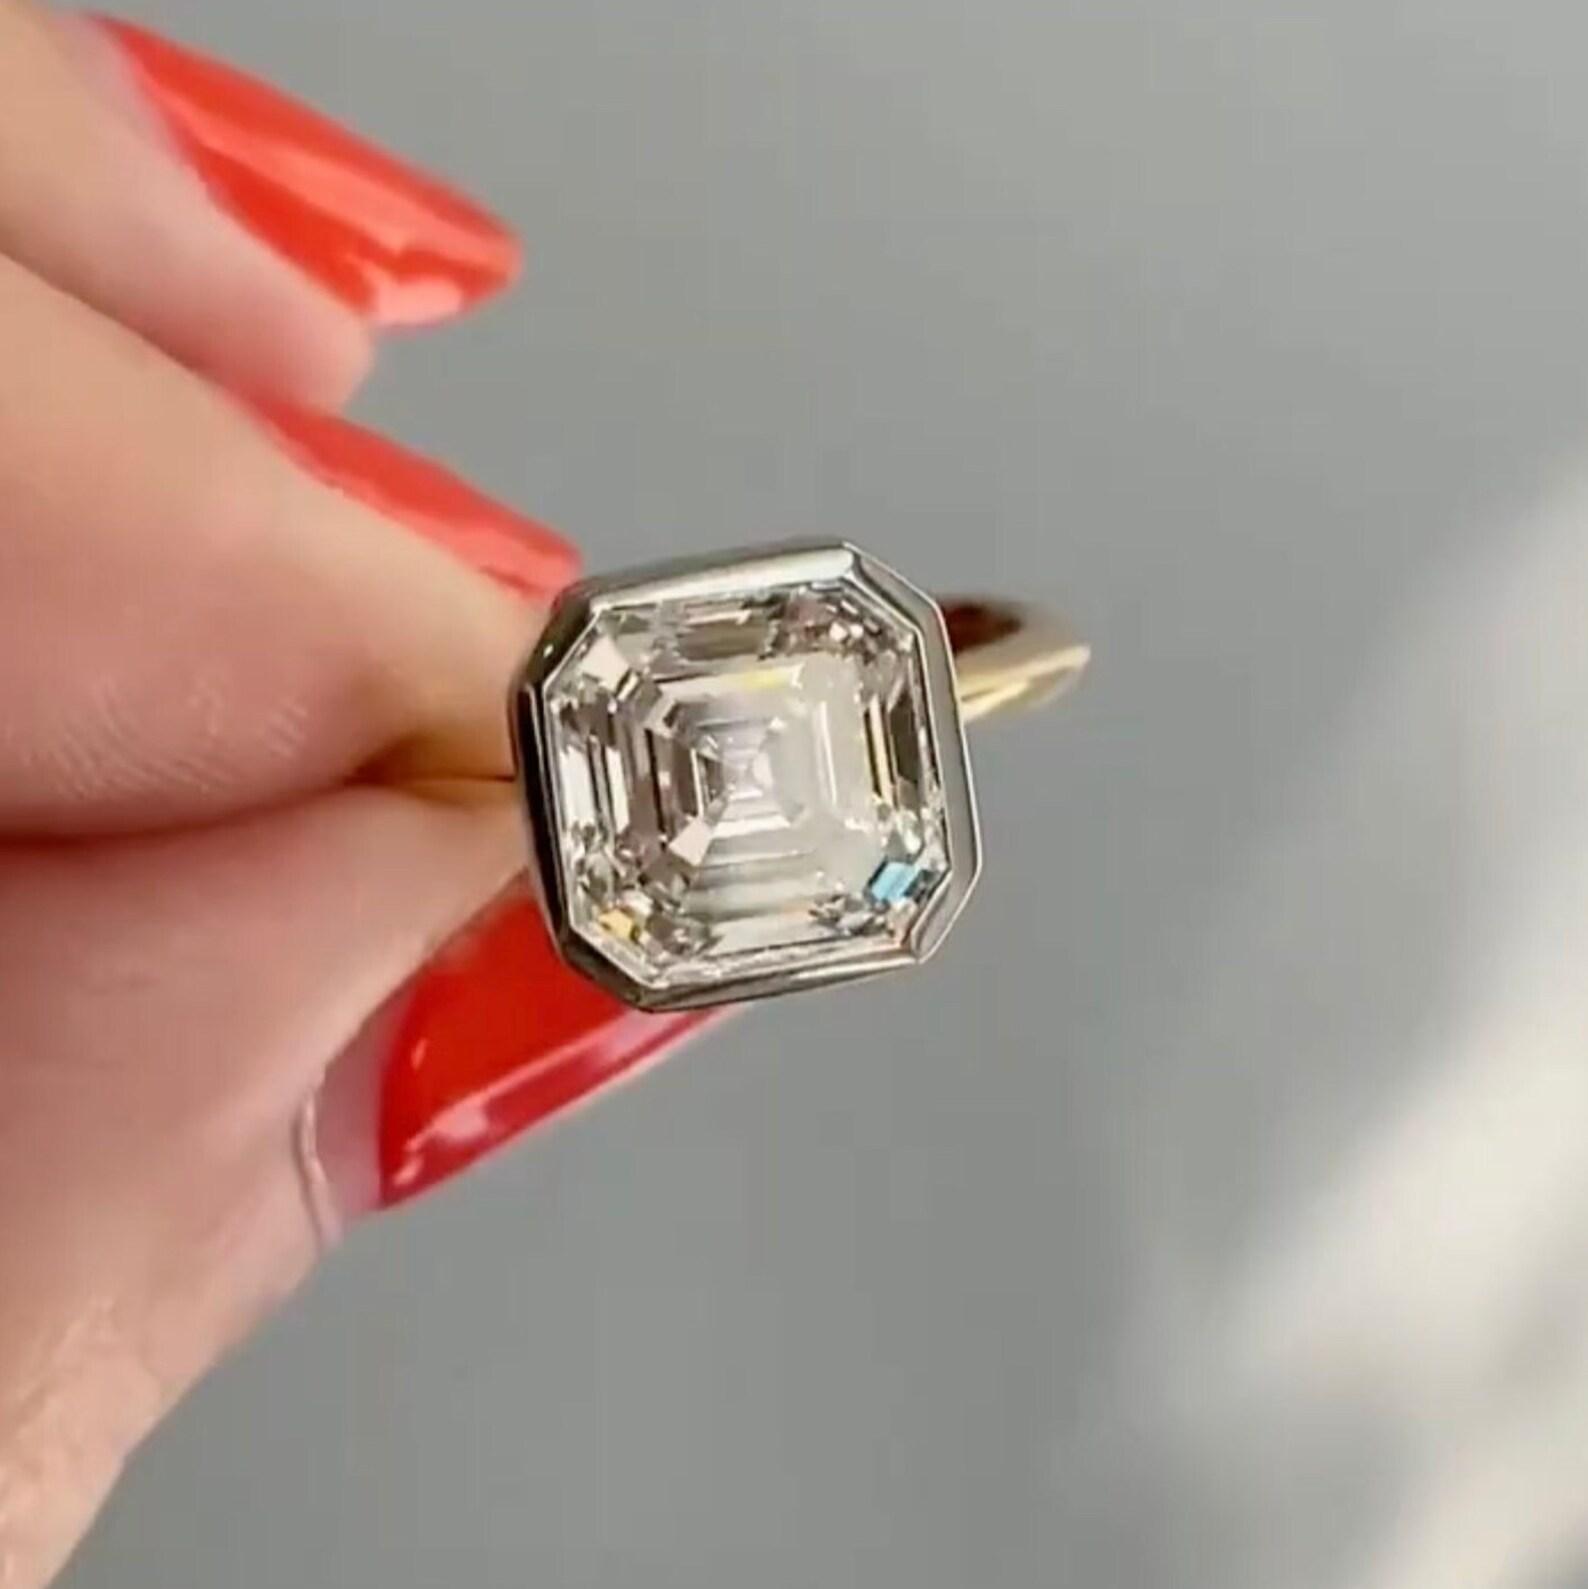 Salt and Pepper Diamond Engagement Rings Are Rare In New Zealand Cover Photo